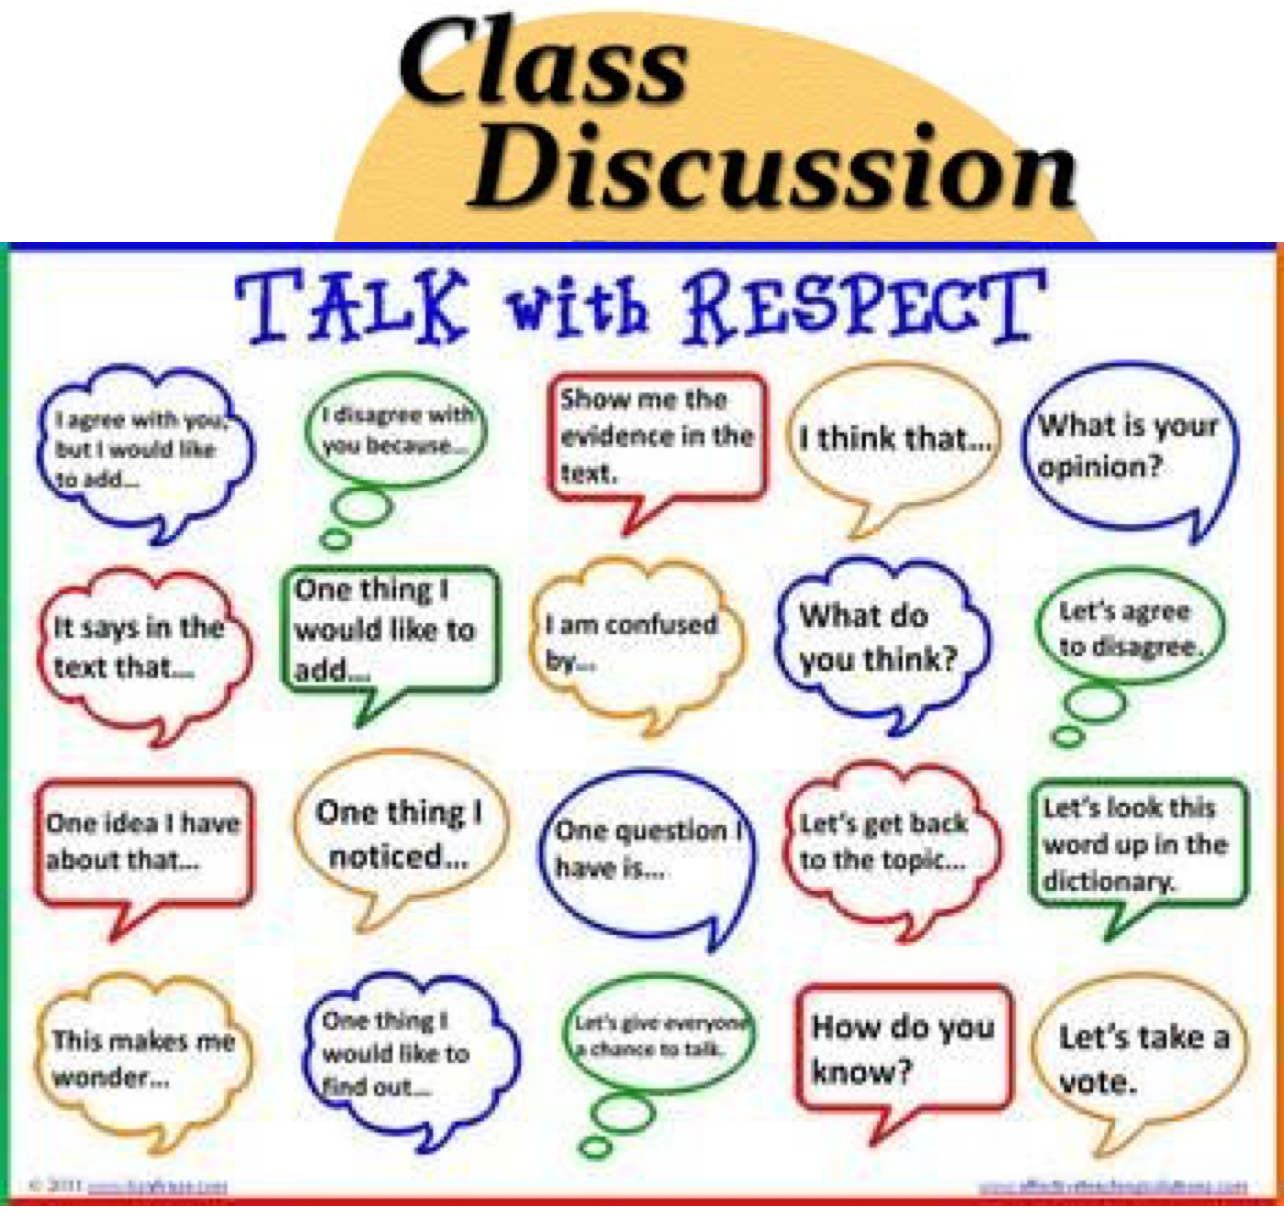 How this what do you think. Speech for Classroom language. Phrases for Classroom. Classroom language phrases for Kids. Classroom language Bubbles.